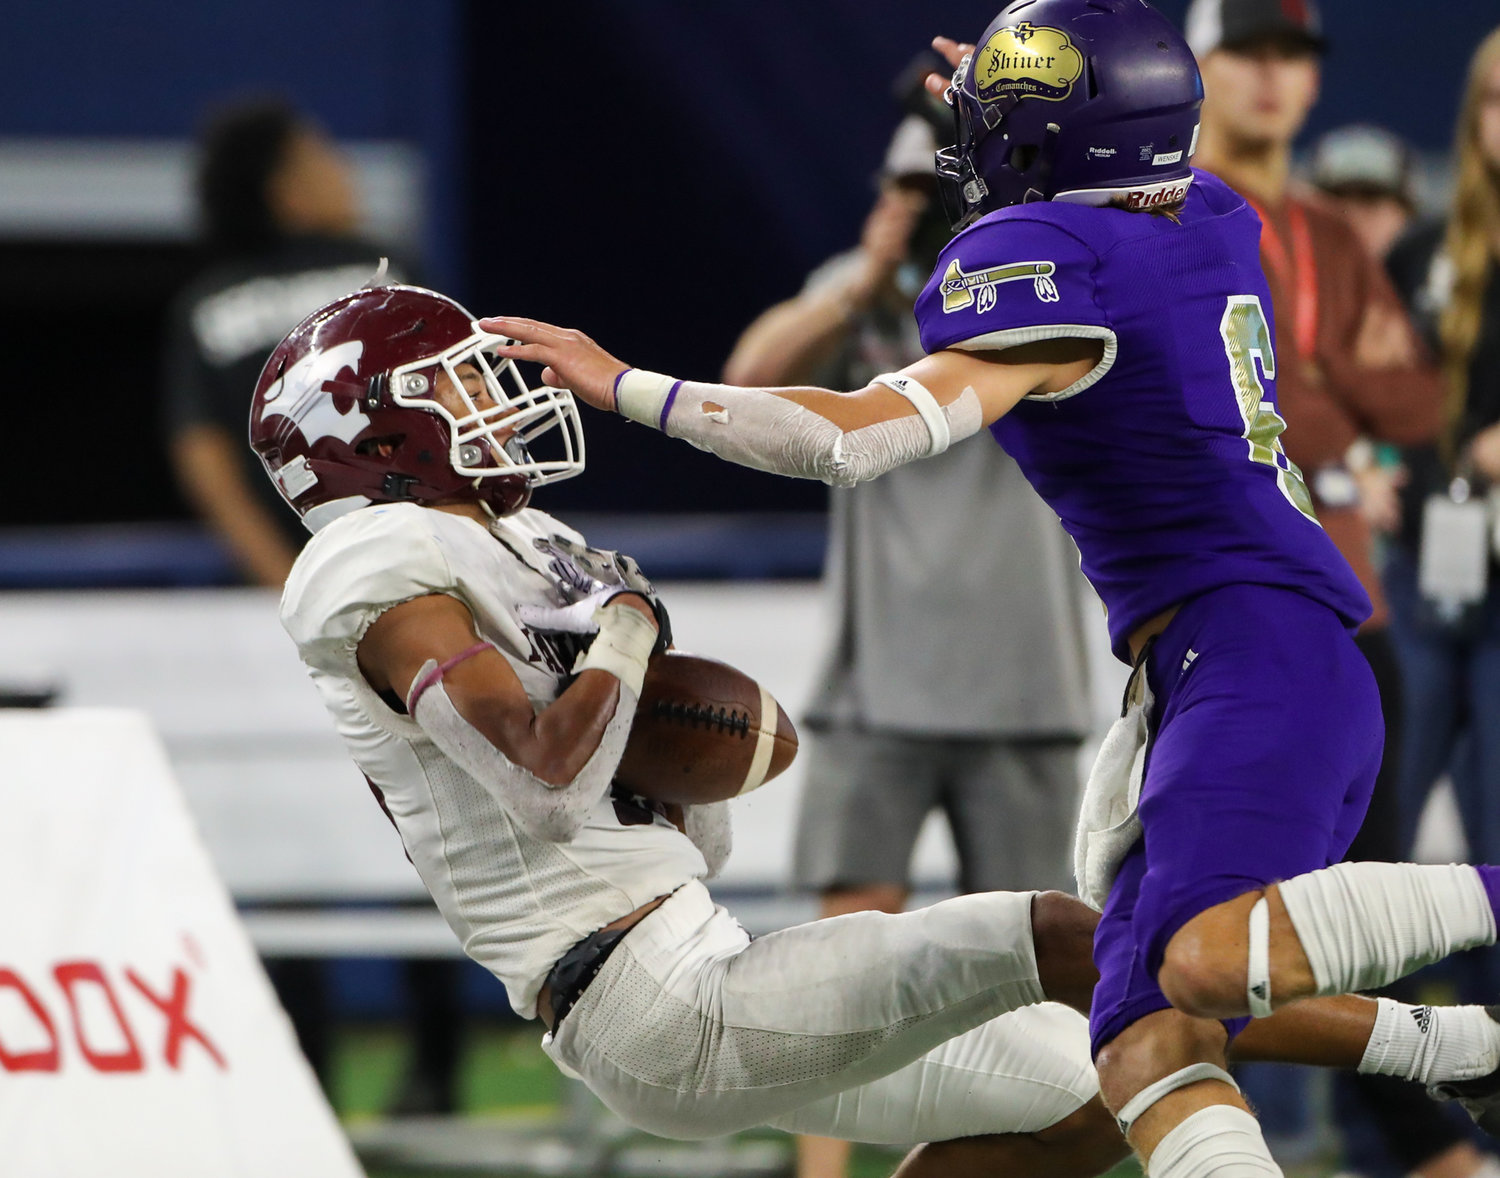 Hawley Bearcats sophomore Chandlin Myers (10) brings in a pass just out of bounds during the Class 2A Division I state football championship game between Shiner and Hawley on December 15, 2021 in Arlington, Texas.